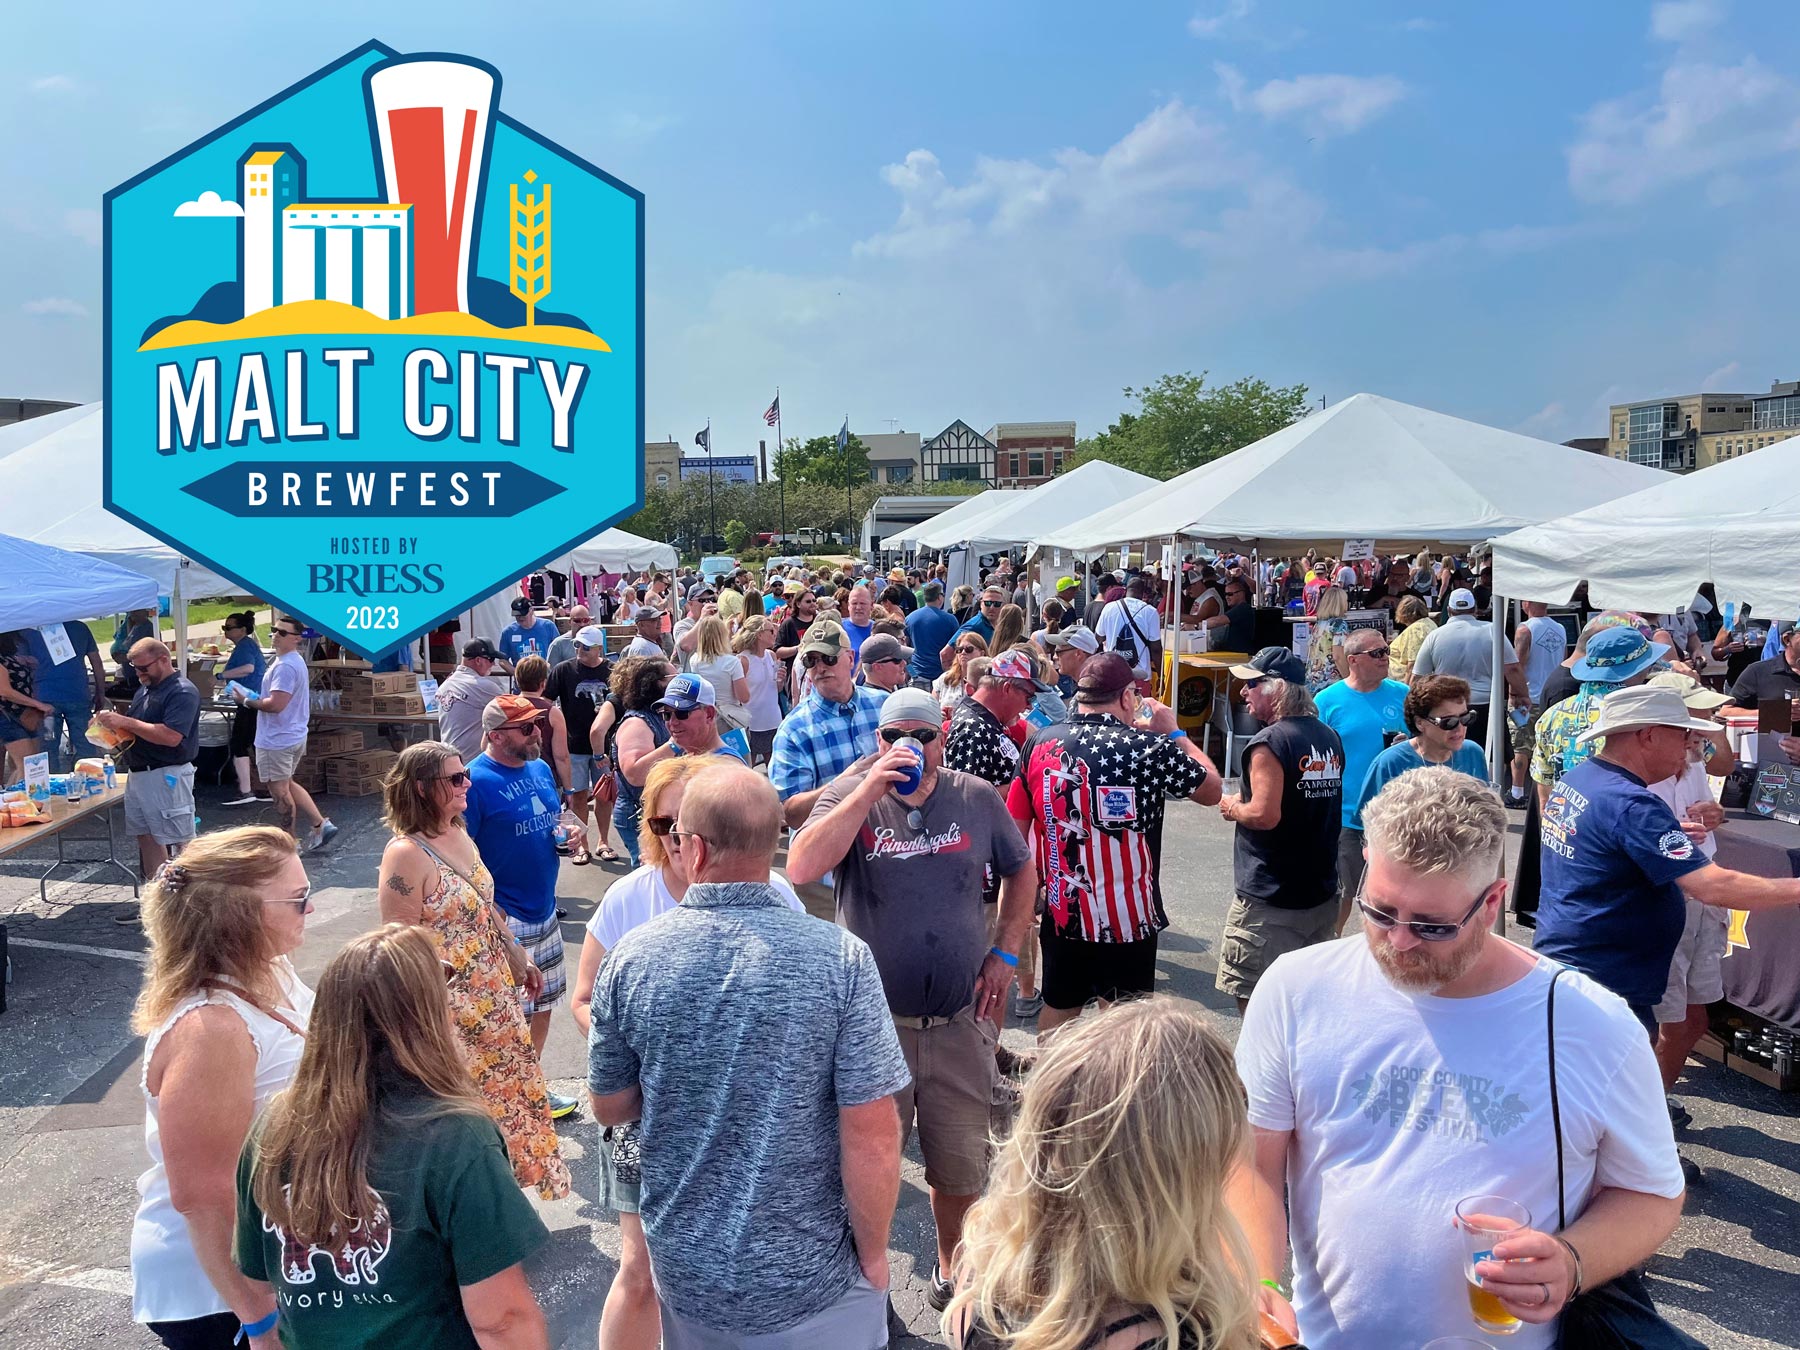 Malt City Brewfest It All Started with Great Beer Brewing With Briess